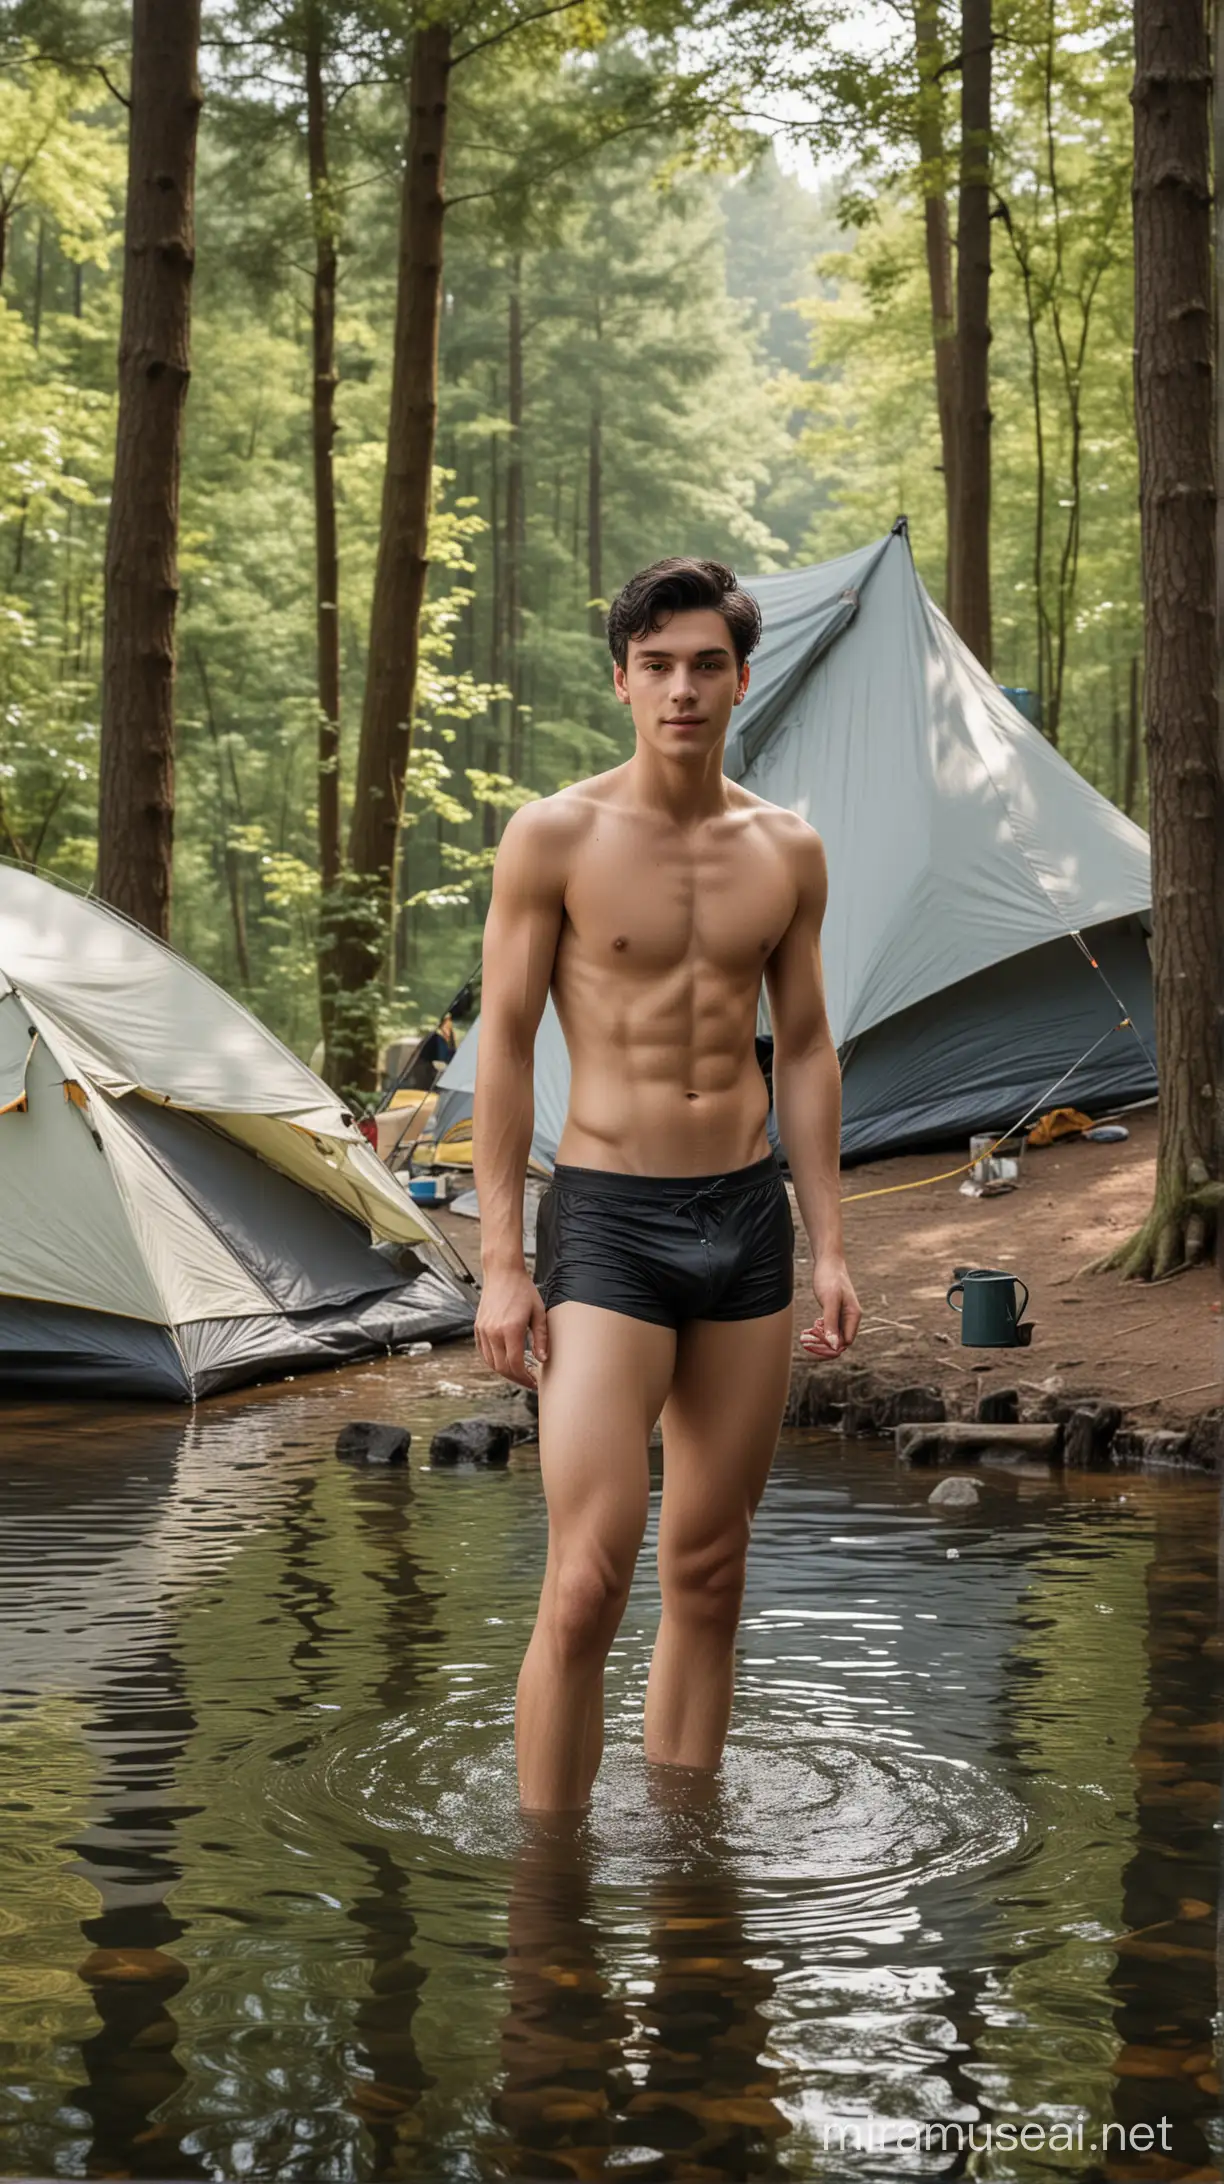 Handsome Young Man Bathing in Lake with Tea Setup in Forest Camping Scene